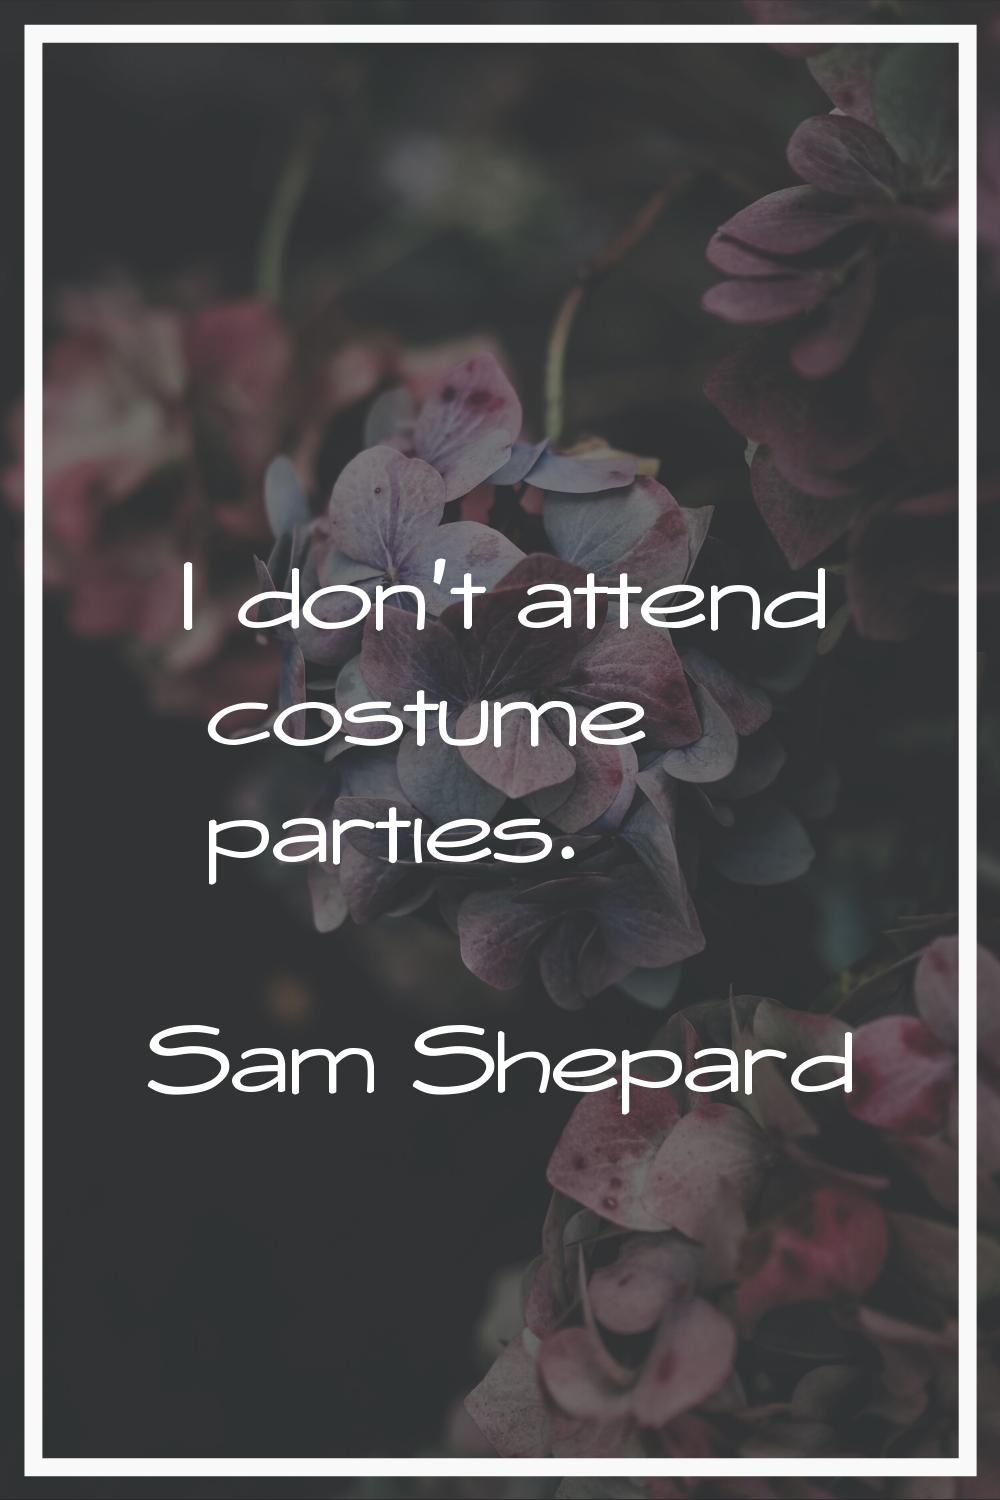 I don't attend costume parties.